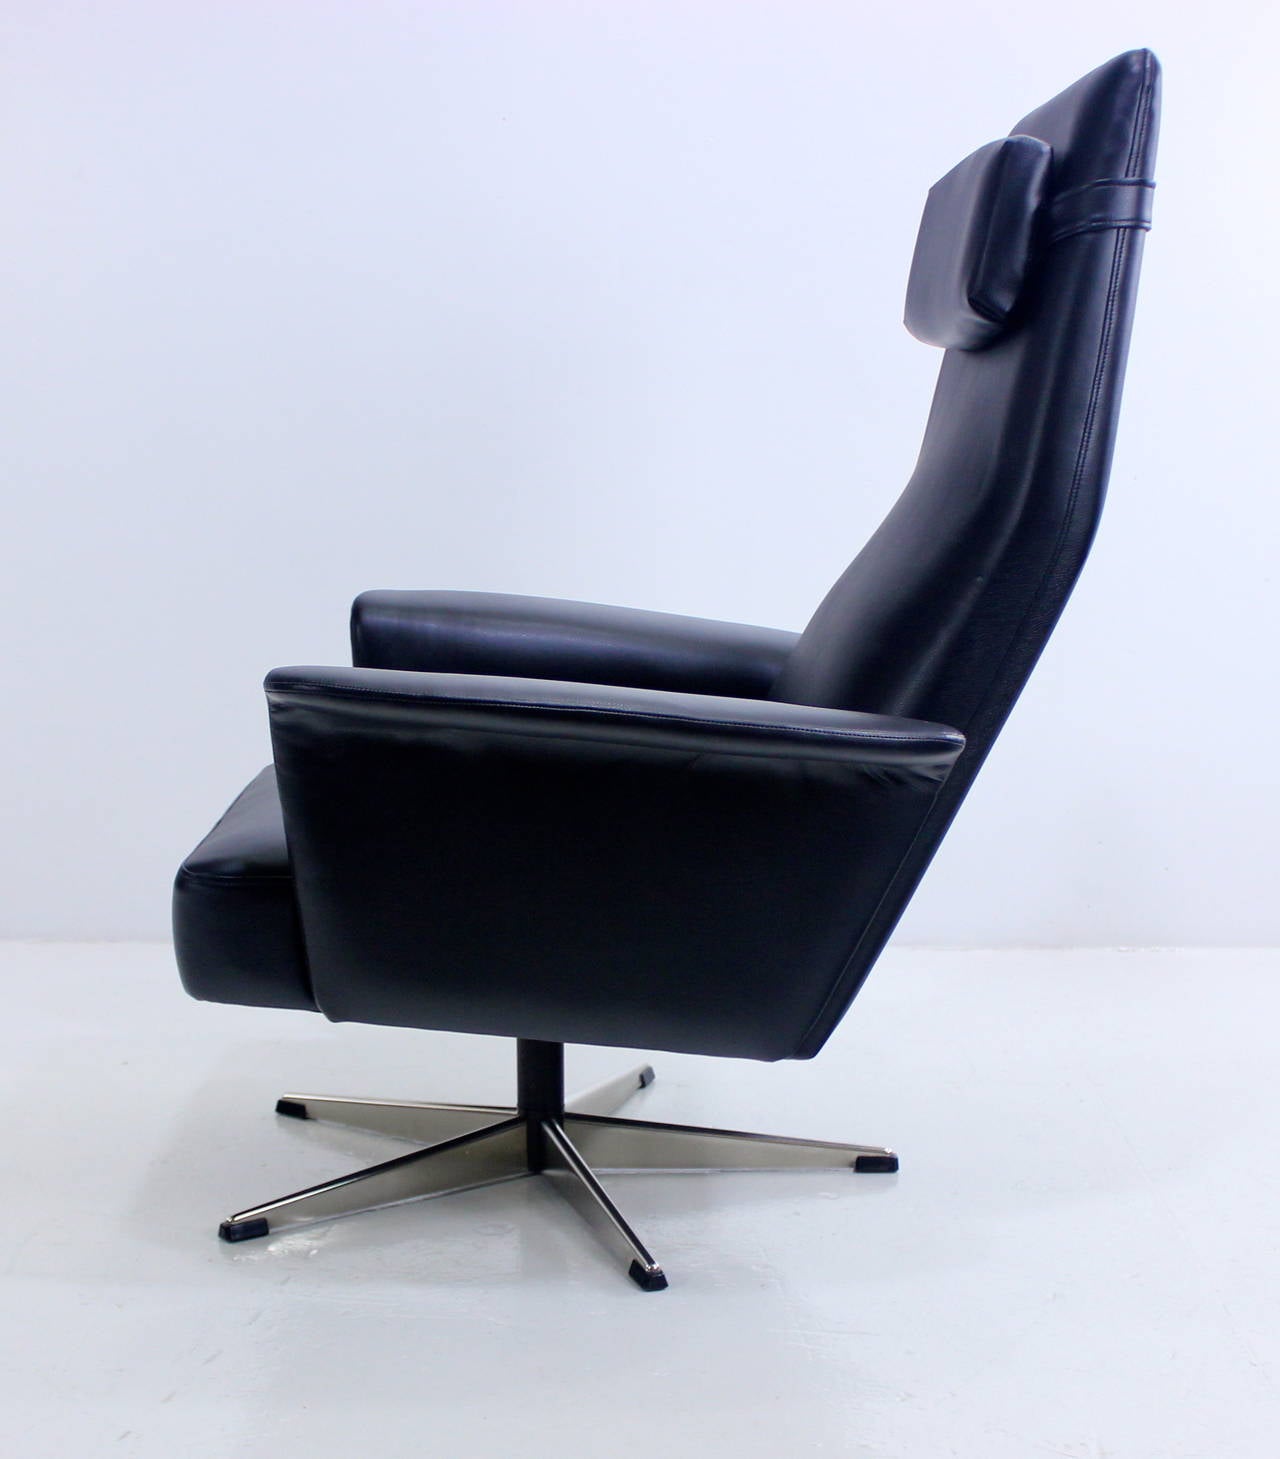 Impressive Danish modern power chair.
Swivels 360 degrees on polished steel base.
New foam throughout provides superior comfort.
Newly upholstered in highest quality black leather, like vinyl.
Detachable pillow.
Professionally restored and